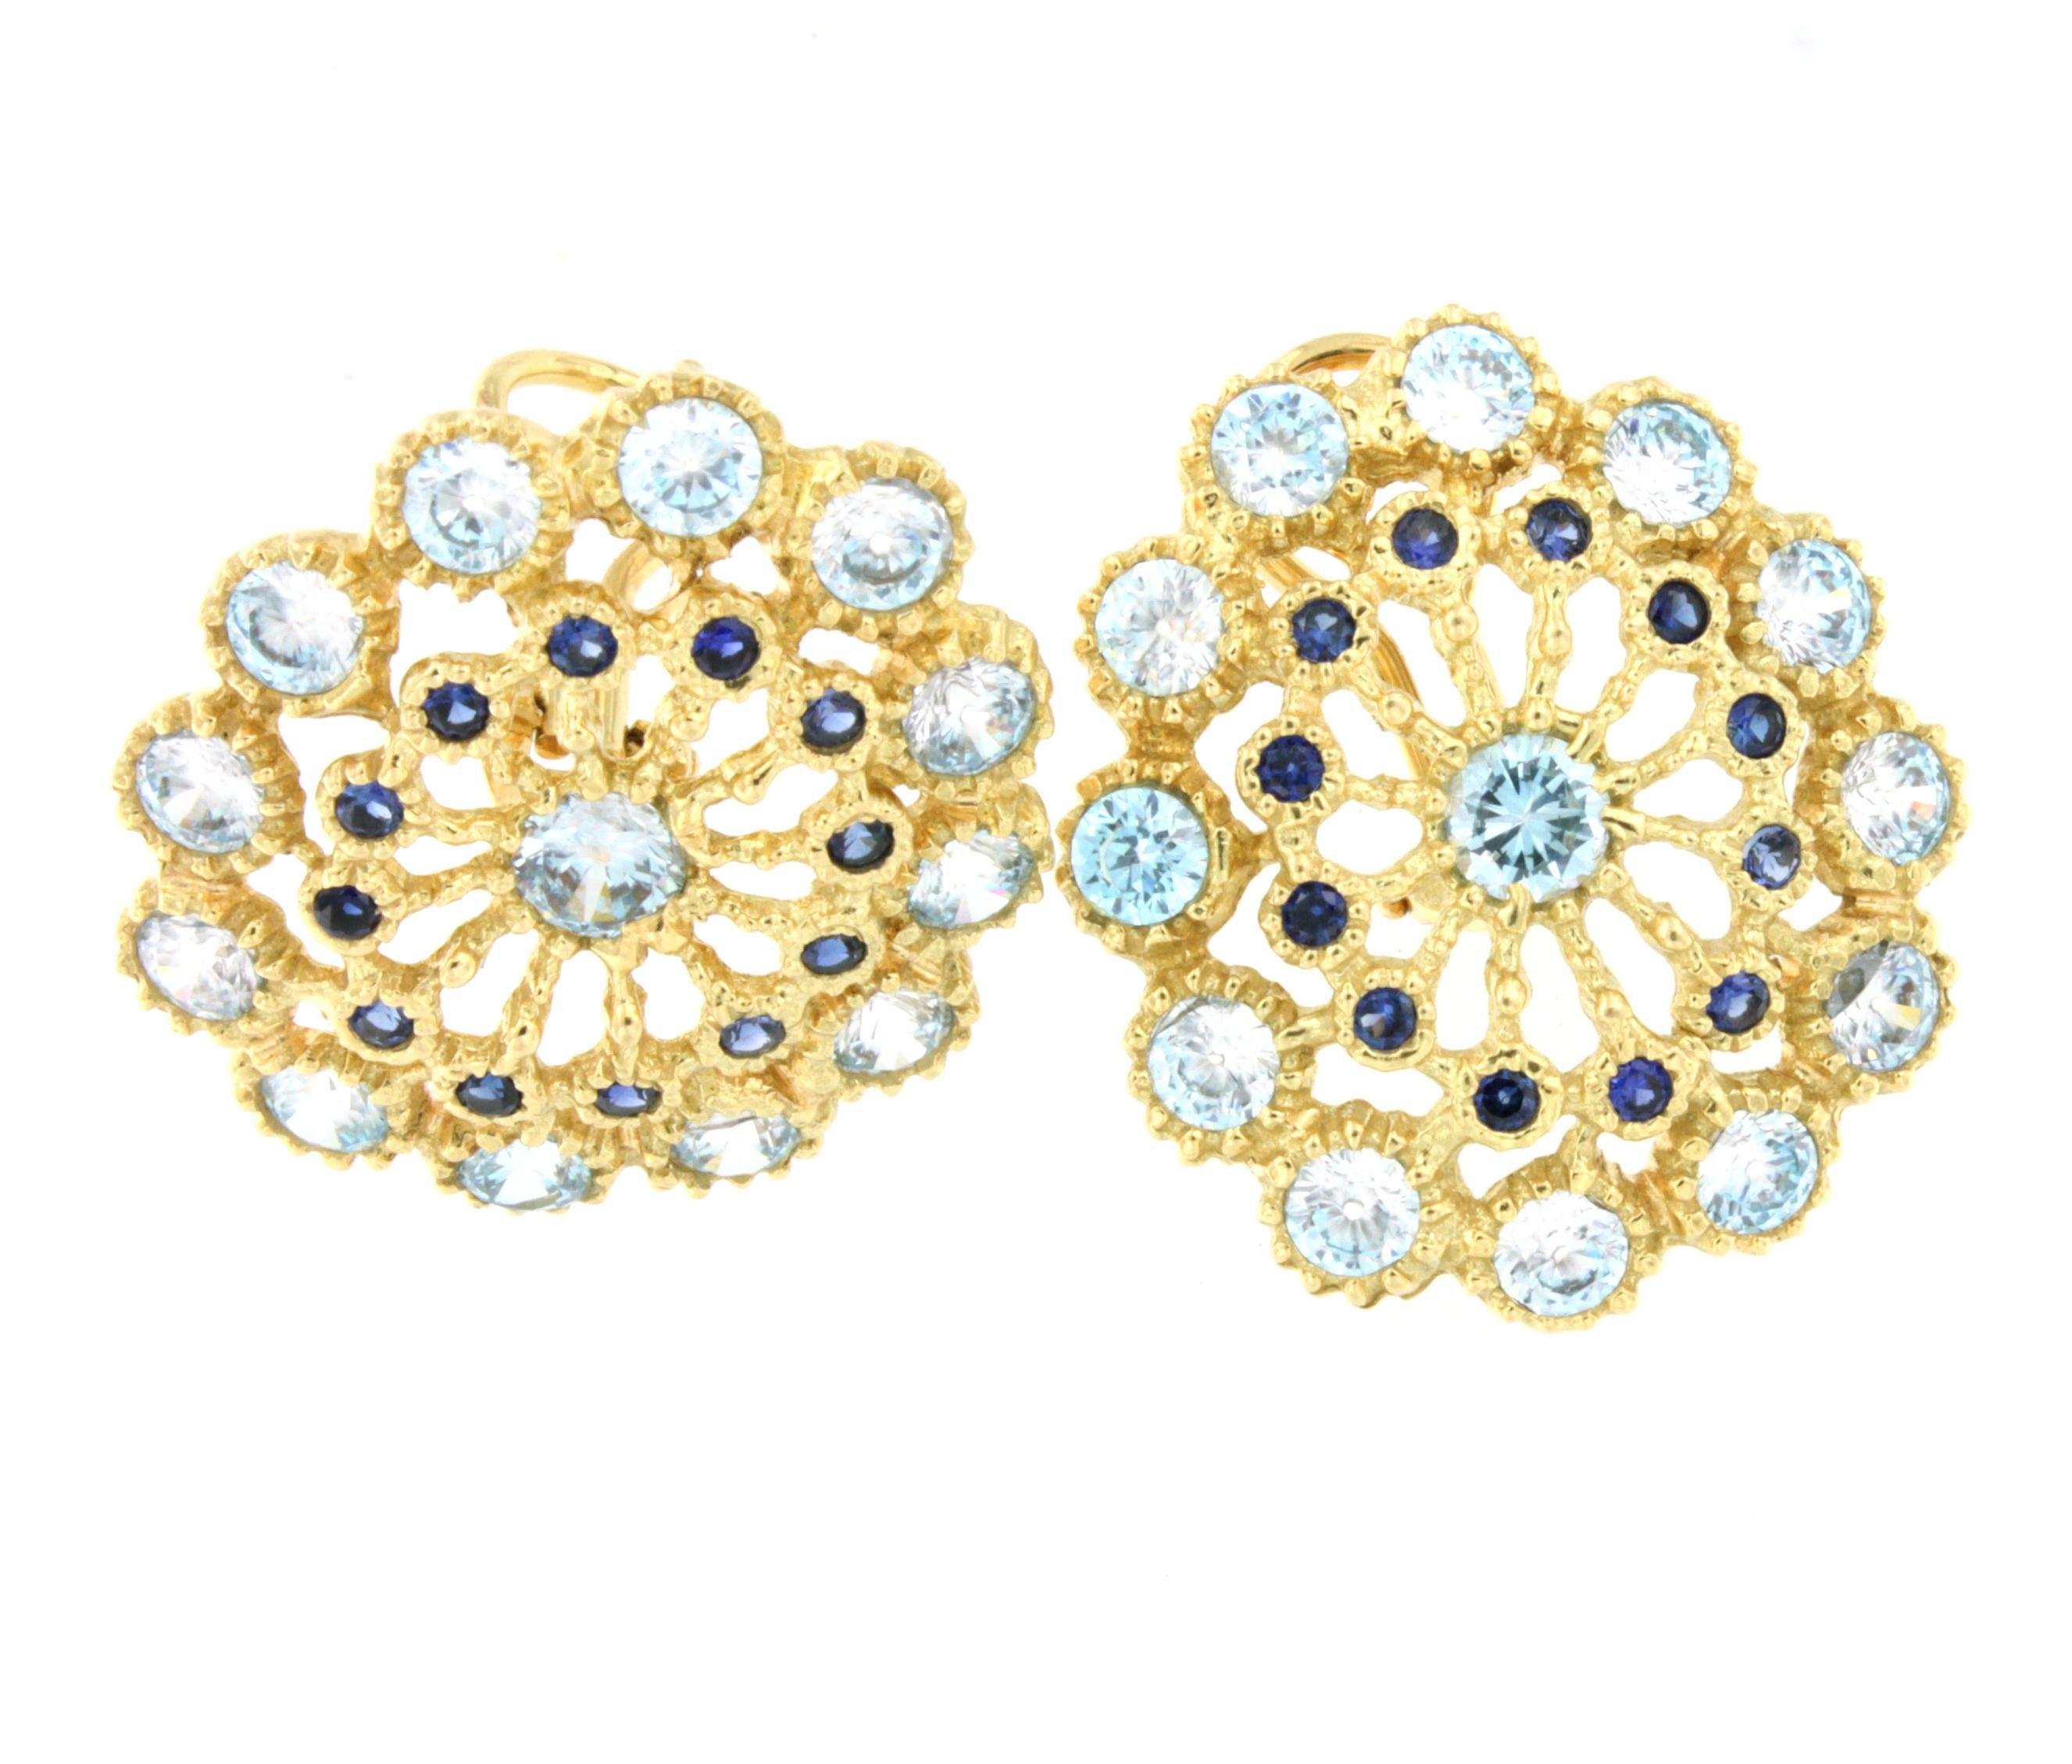 gold earrings that seem embroidered, reminiscent of lace. They belong to a Stanoppi collection made in Italy since 1948 .

18Kt Yellow Gold with Blue Topaz and Blue Sapphires (no natural )  Fashion Clips Earrings 
g.18,30  

 All Stanoppi Jewelry is